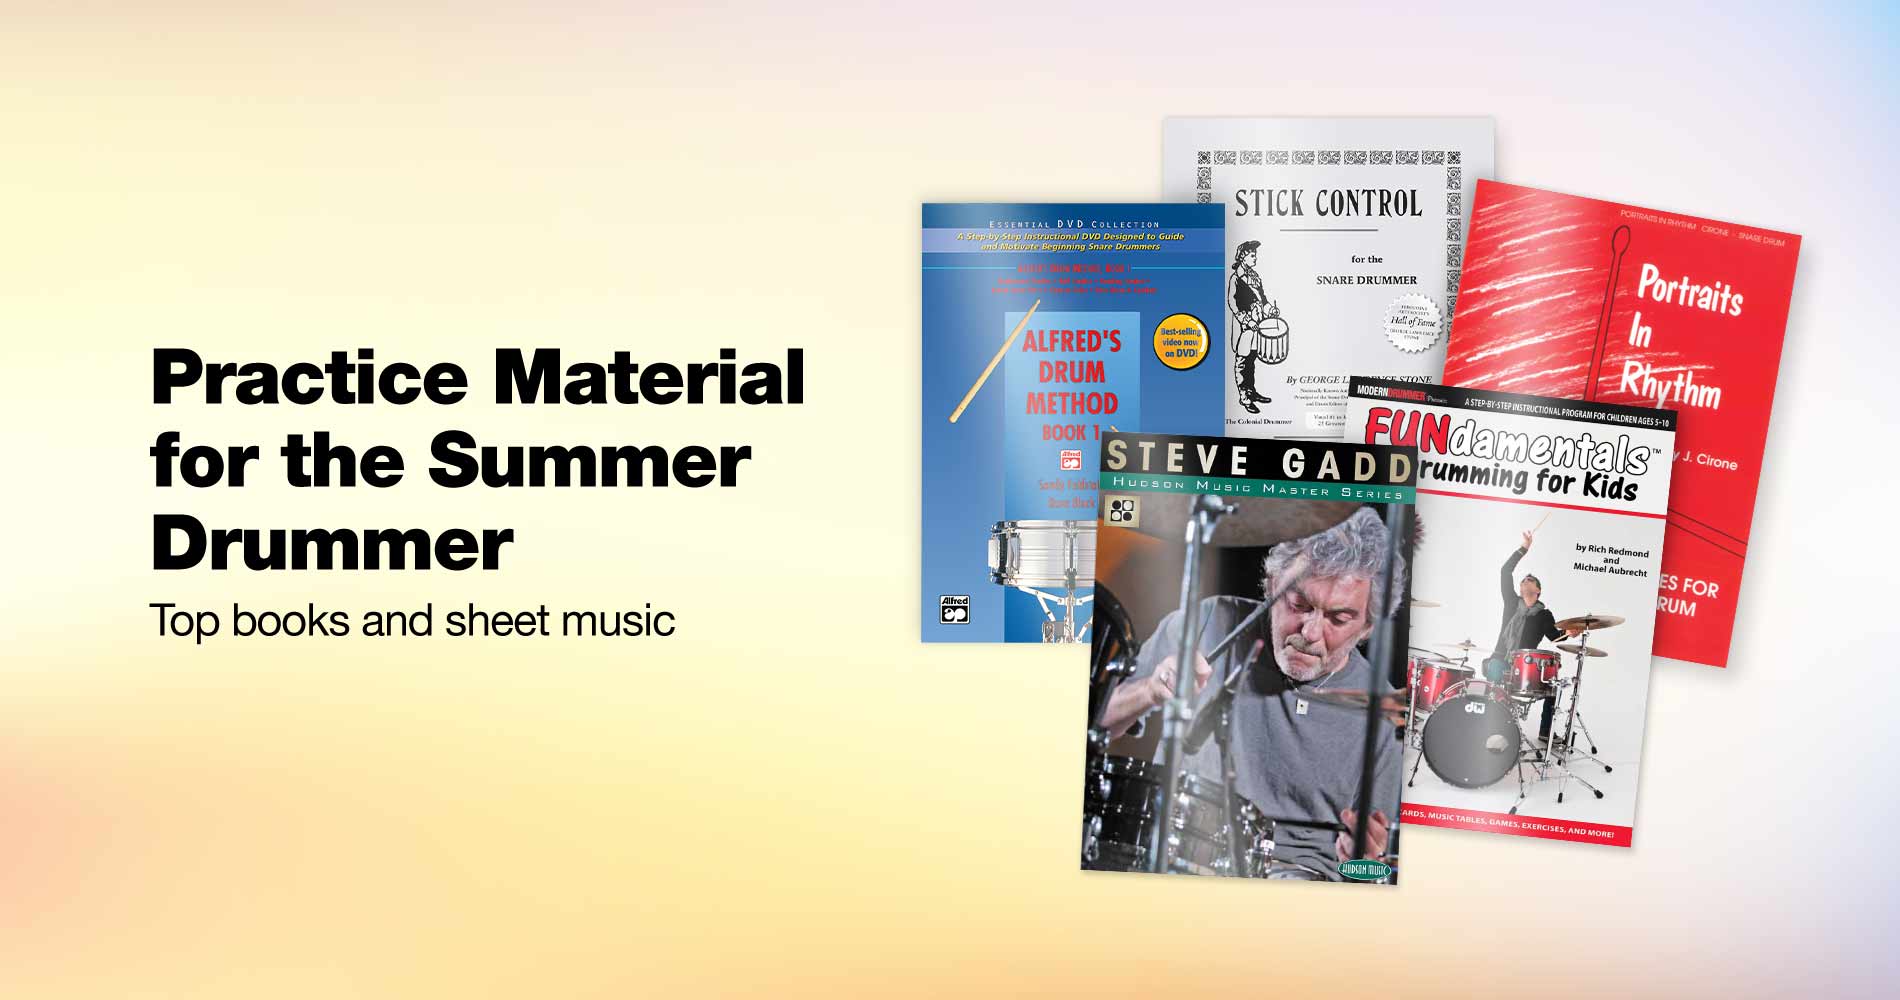 Practice Material for the Summer Drummer